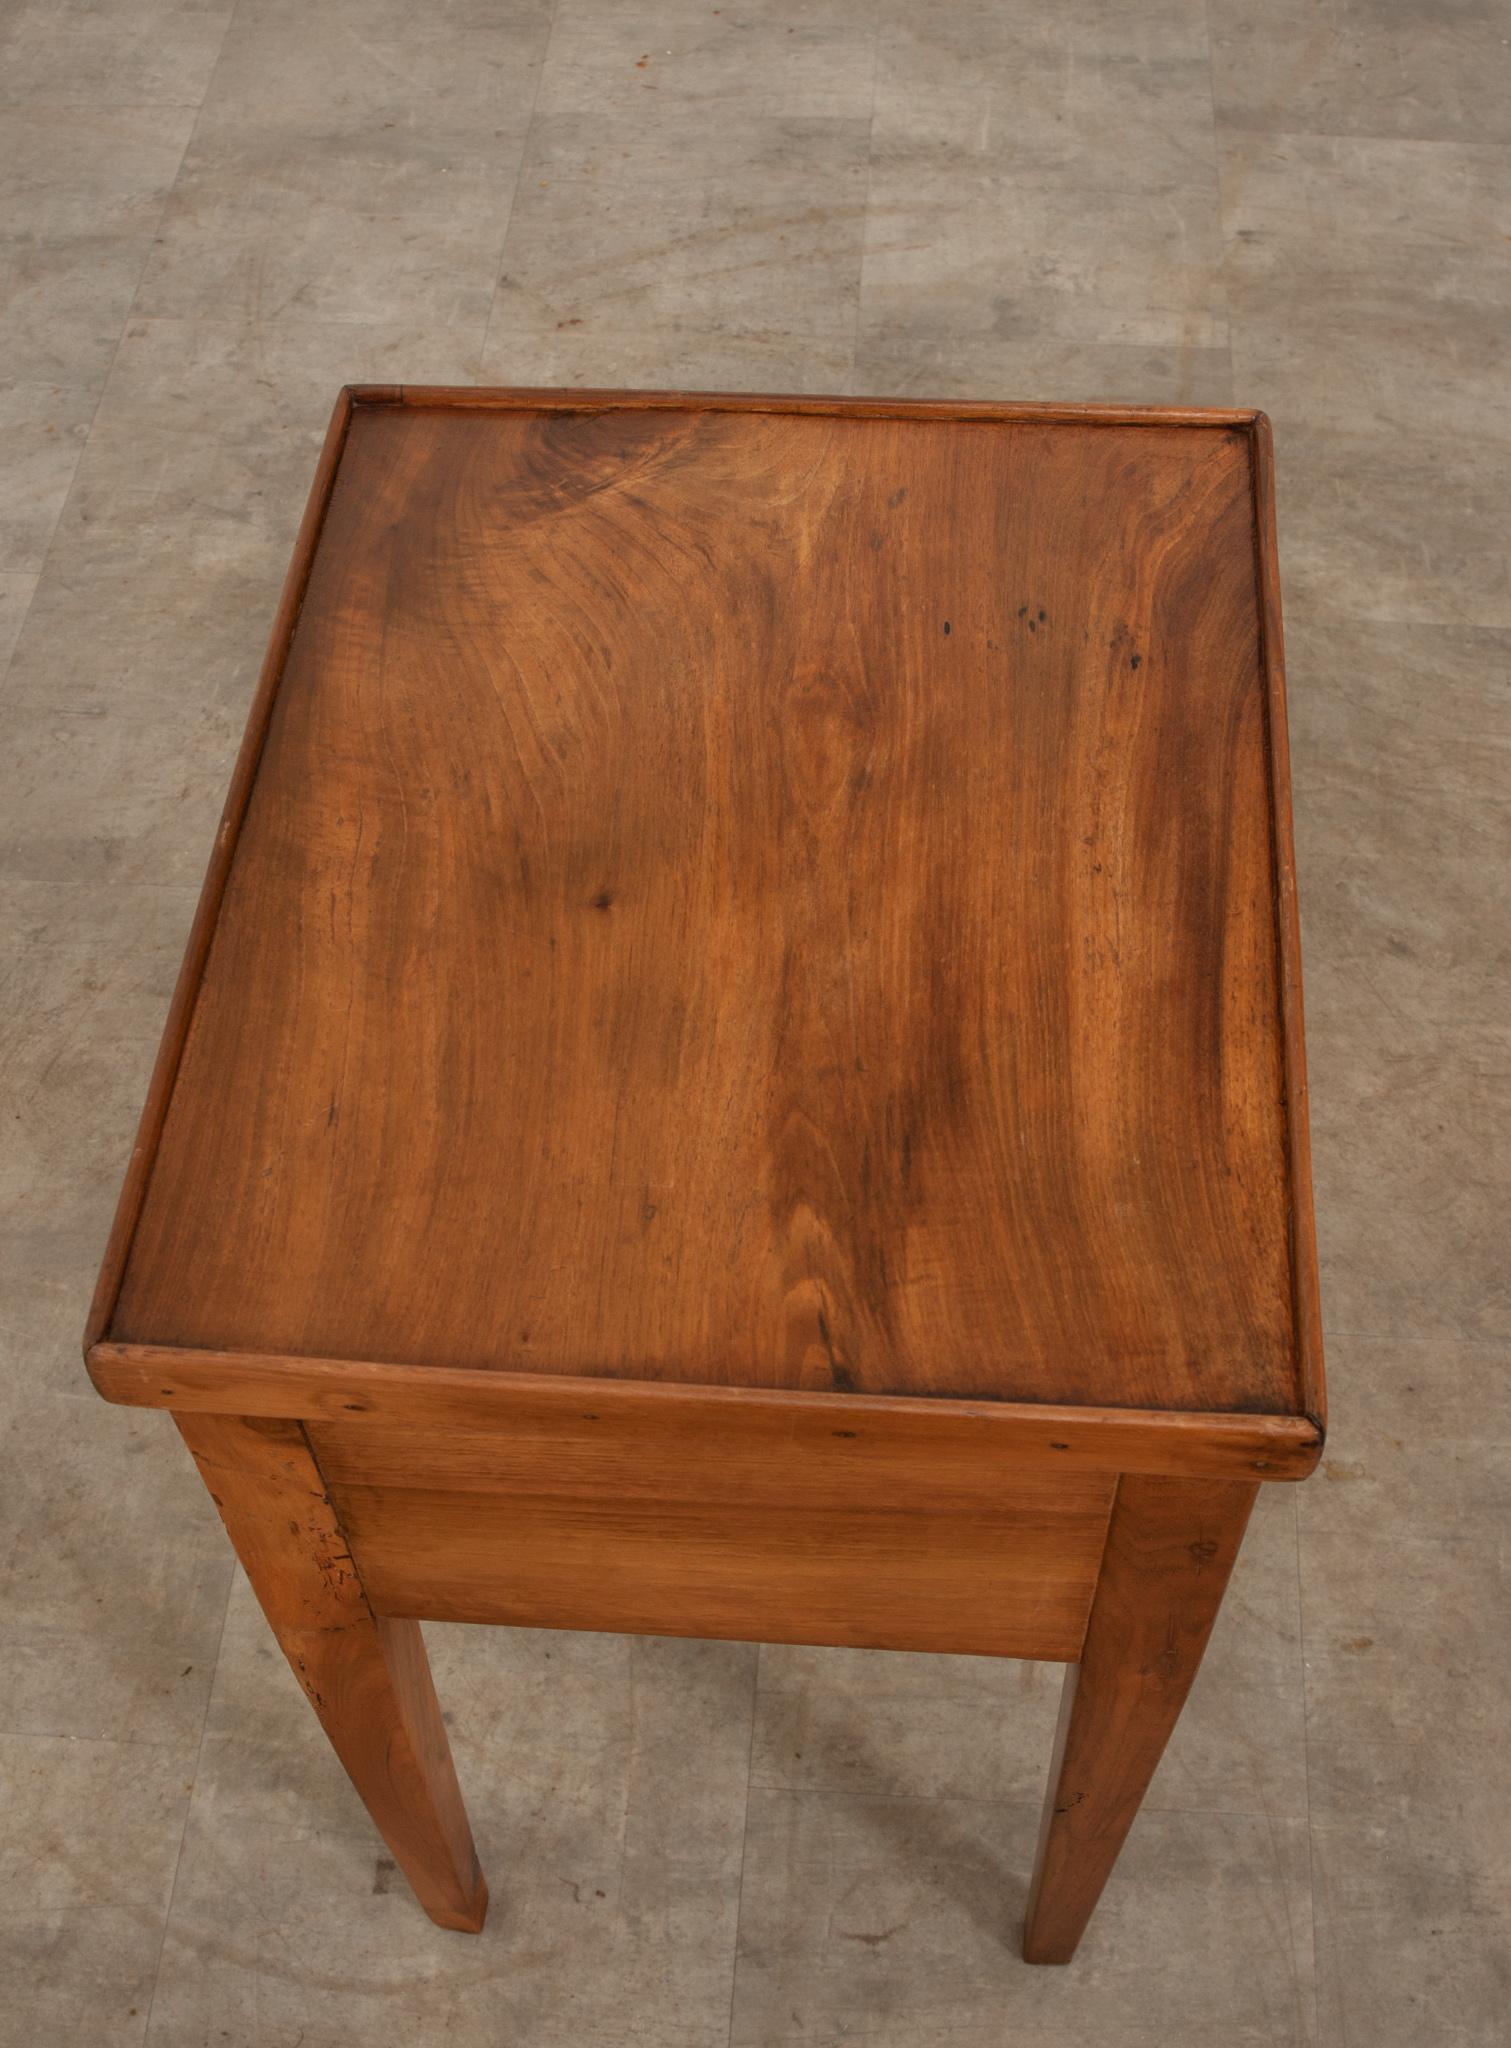 French 19th Century Solid Walnut Bedside Table In Good Condition For Sale In Baton Rouge, LA